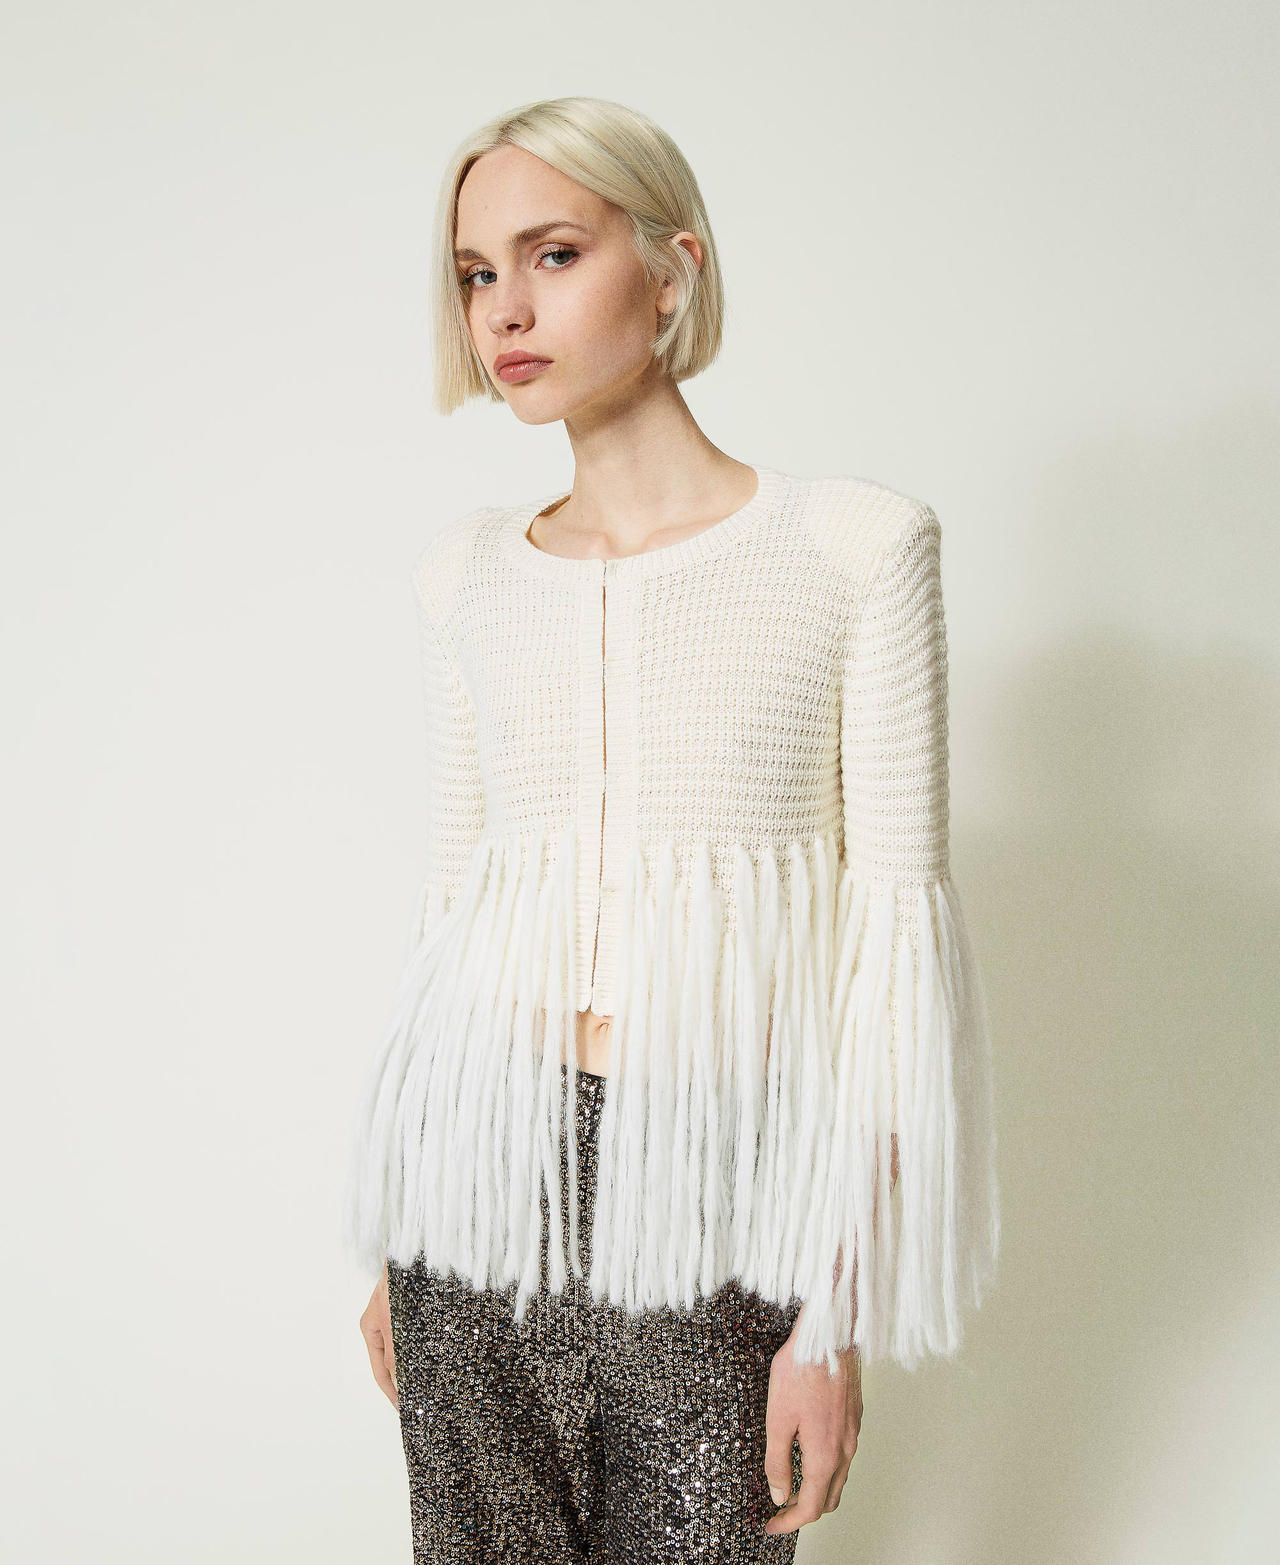 Wool blend jacket with fringes Lily Woman 232AP3300-02